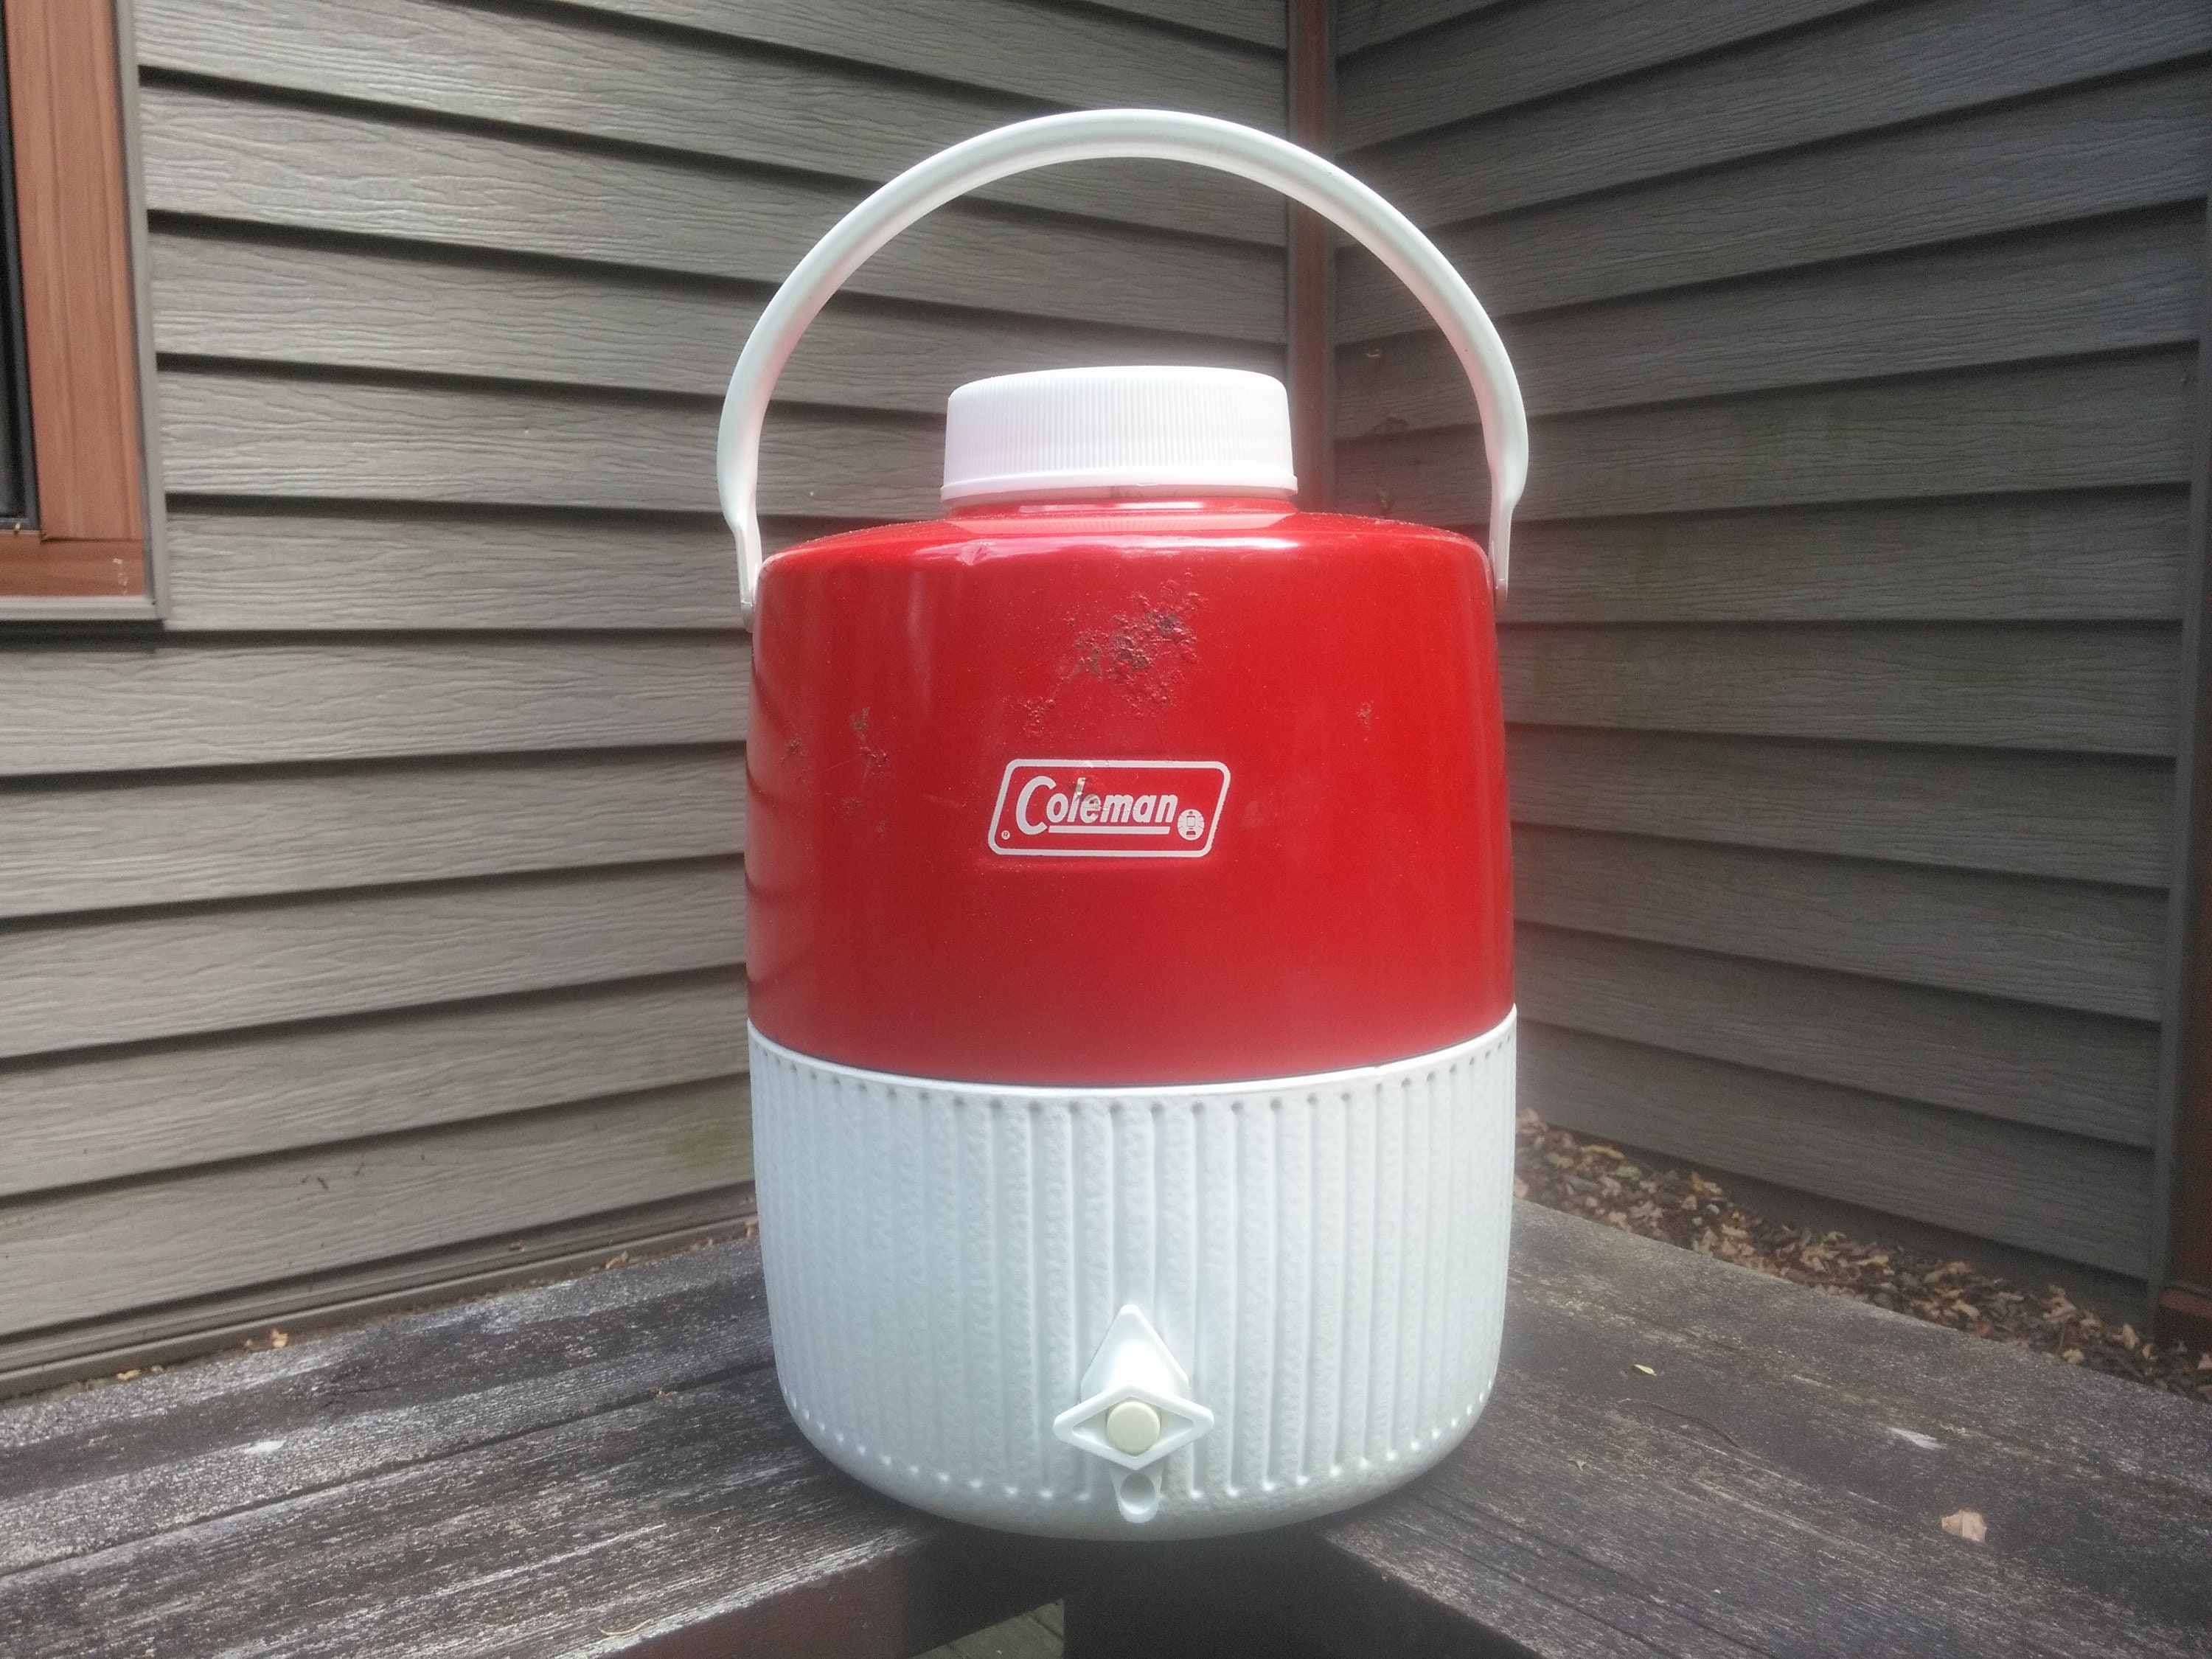 Vintage Coleman Thermos Water Bottle Jug Cooler 5542 1/3 Gallon Red White  USA